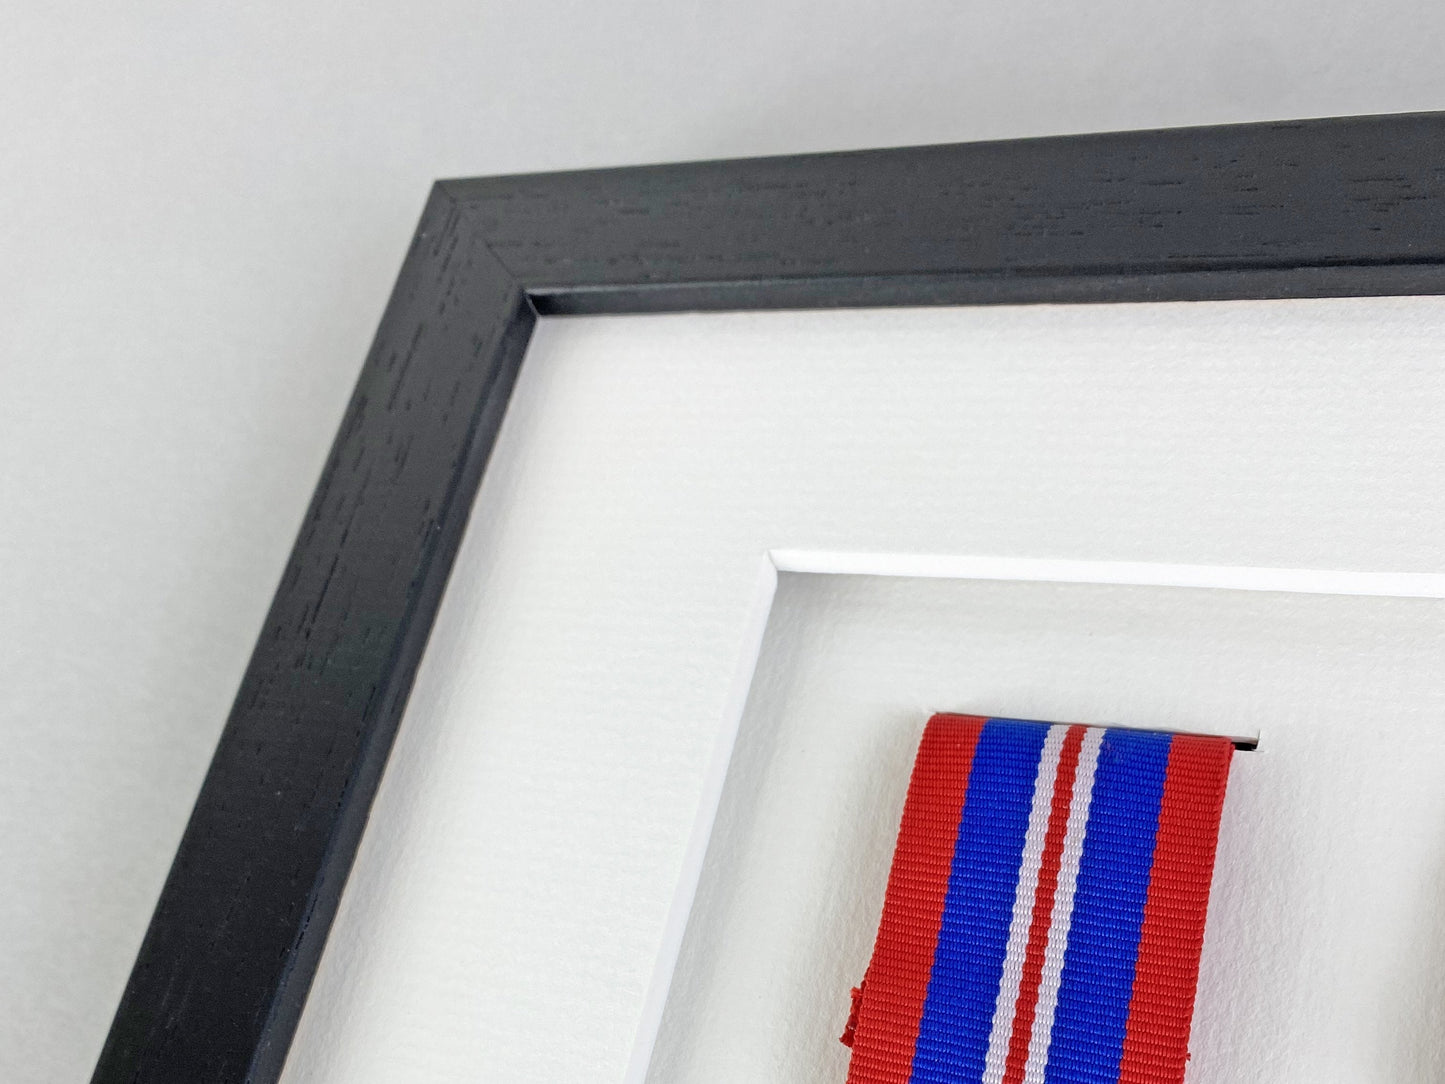 Military and Service Medal display Frame for Eight Medals and two 6x4" Photographs. 20x70cm. Handmade by Art@Home. War Medals.